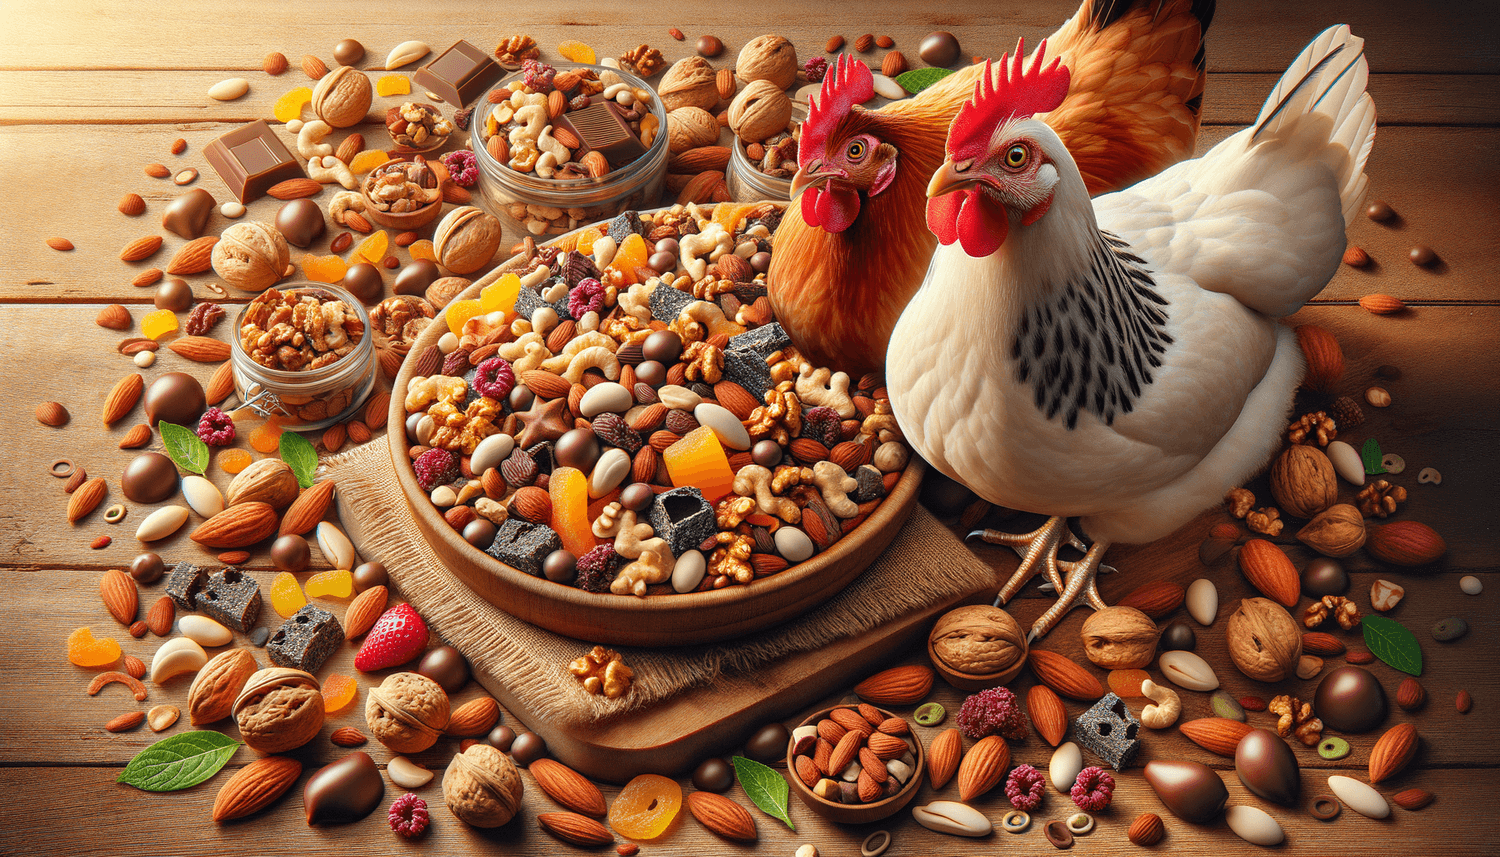 Can Chickens Eat Trail Mix?